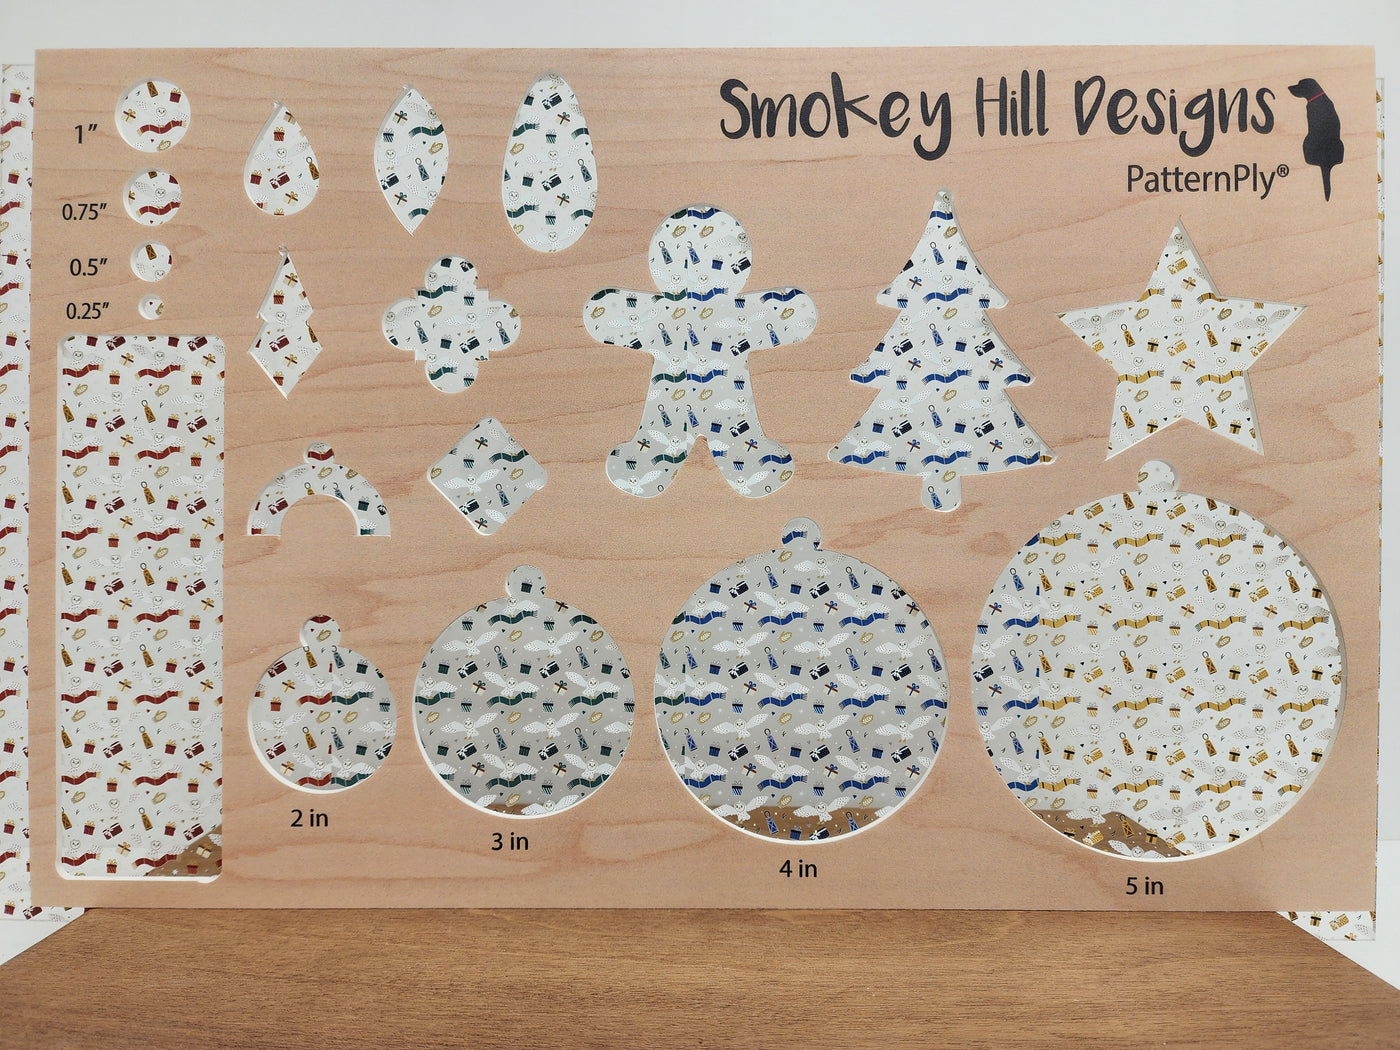 PatternPly® Scattered Owls and Gifts Assortment